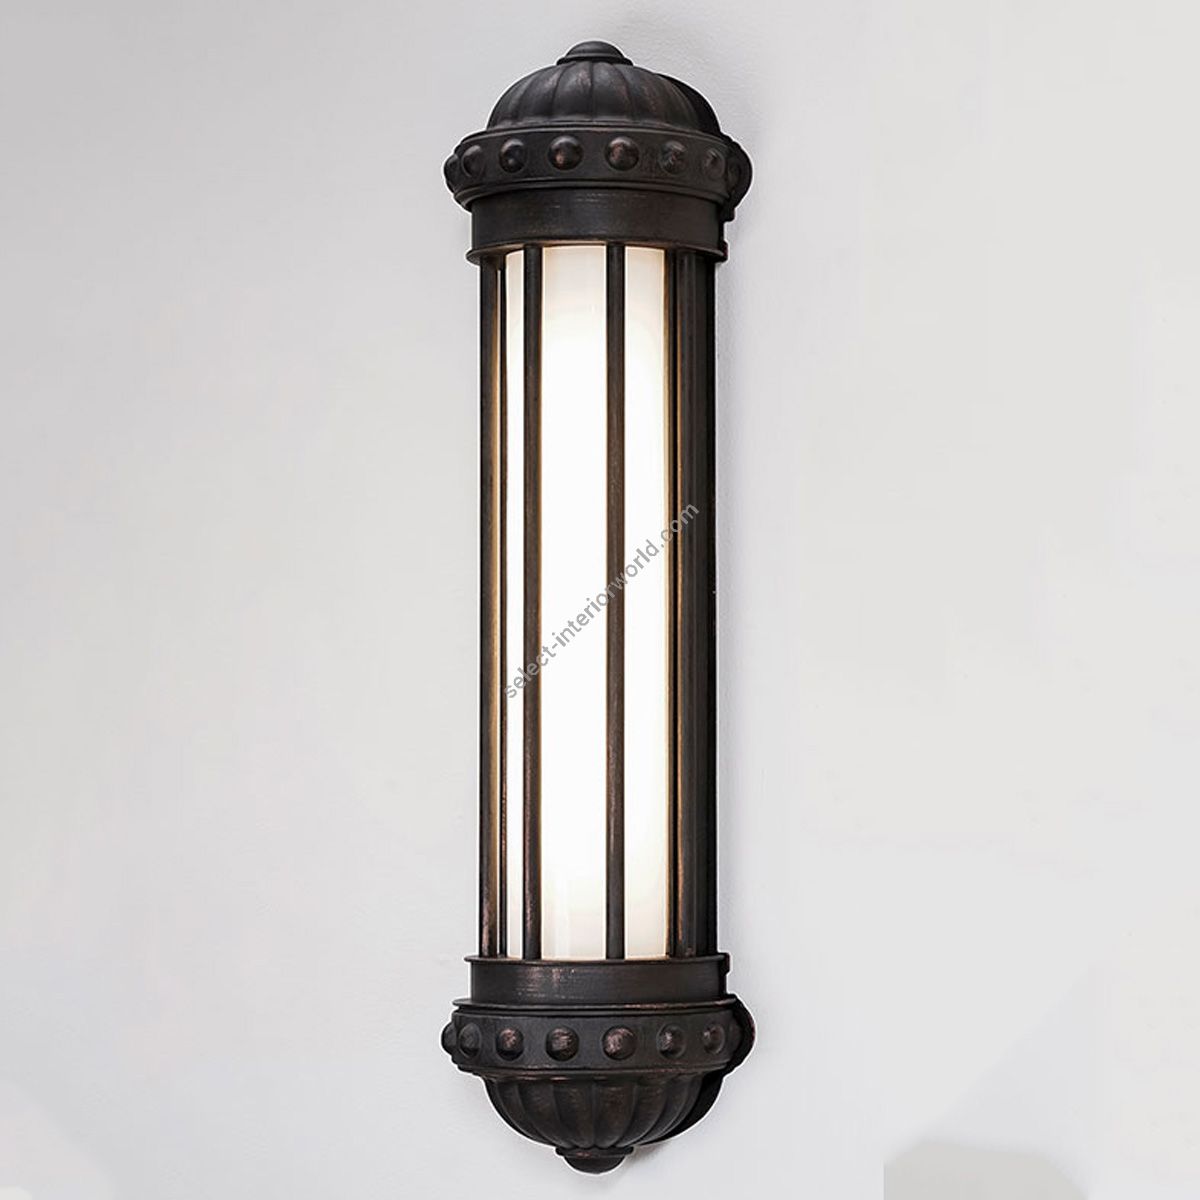 Large Historical Outdoor Wall Light made of wrought iron by Robers